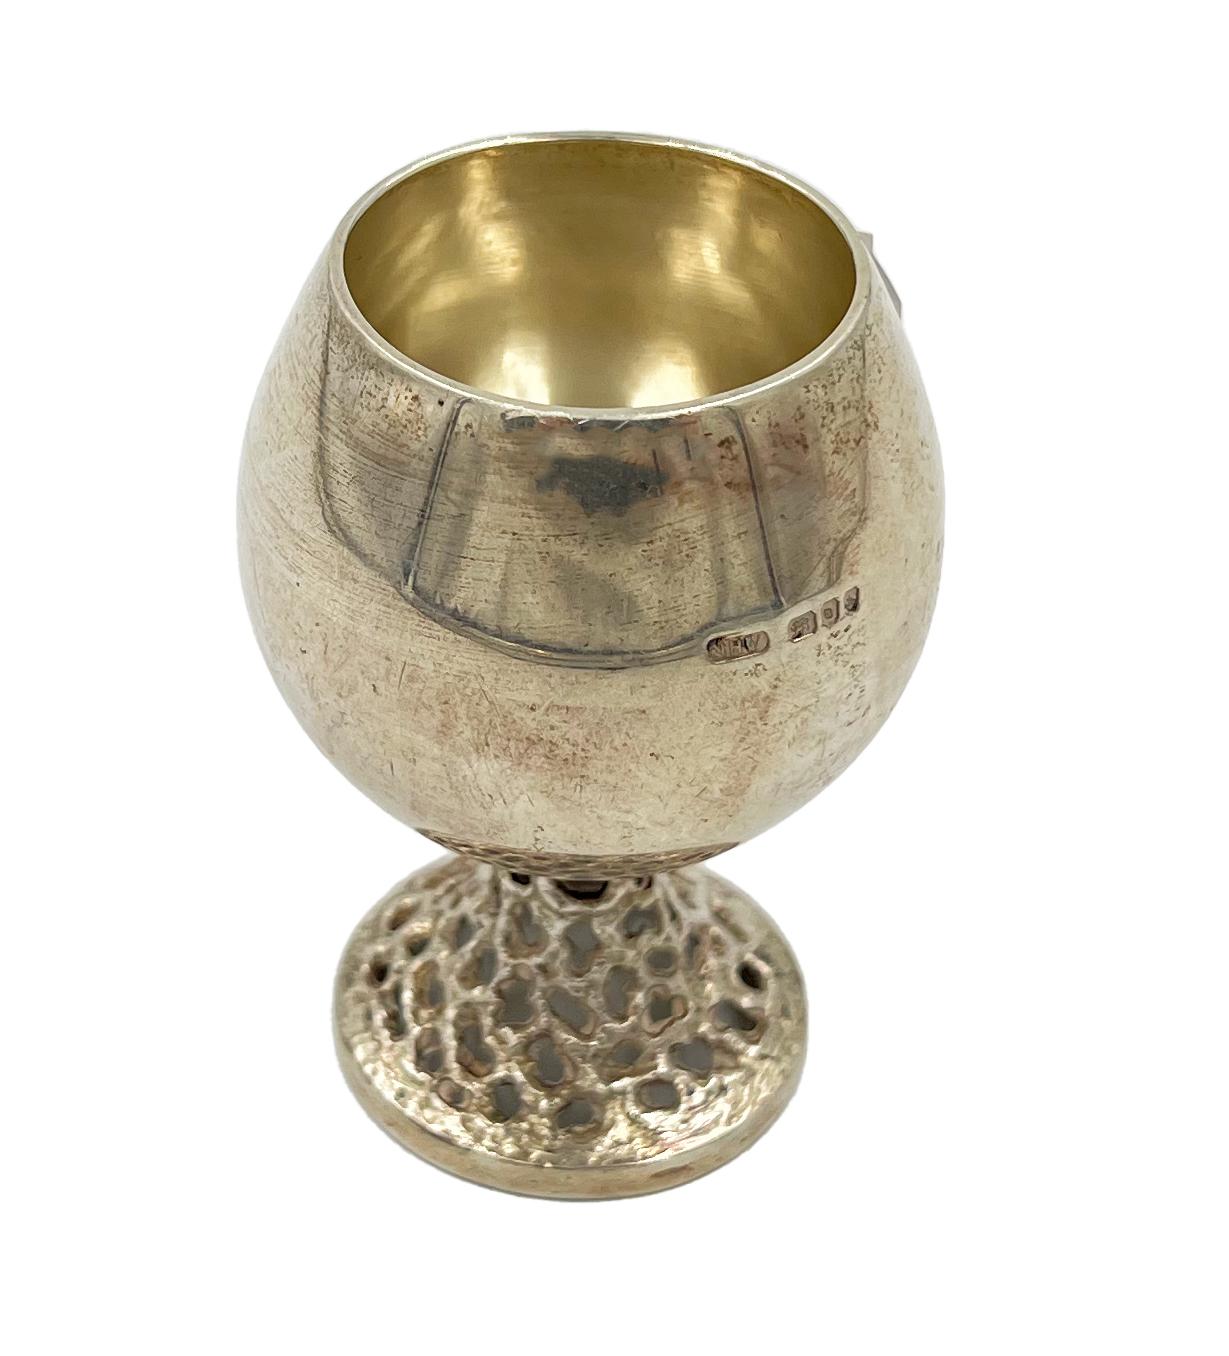 A MODERN SILVER BRANDY CUP, LONDON, JHW, 2000 - Image 2 of 3